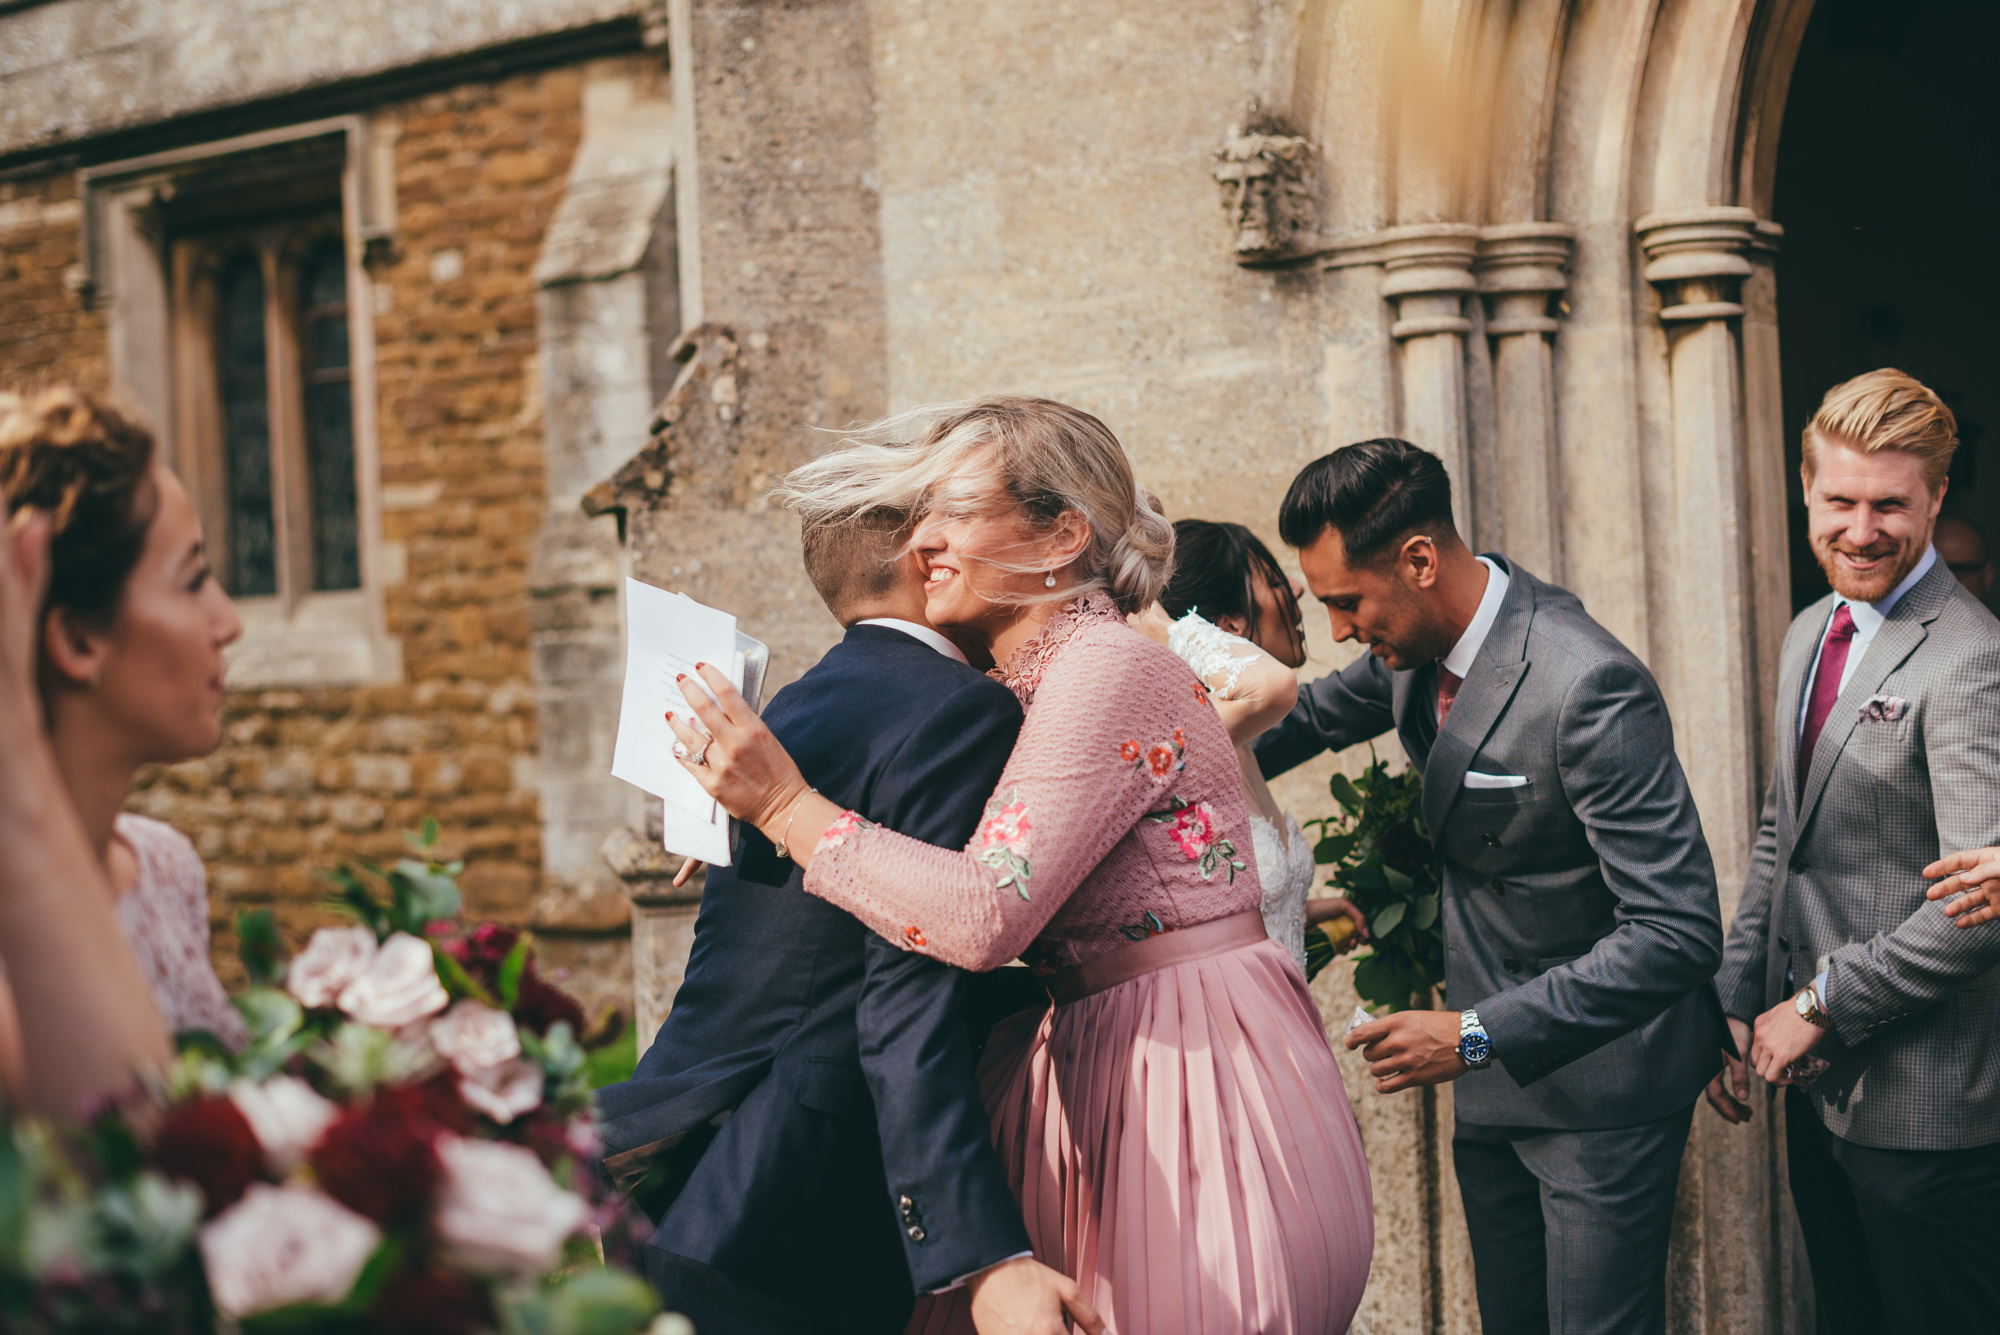 guests hugging after the wedding ceremony